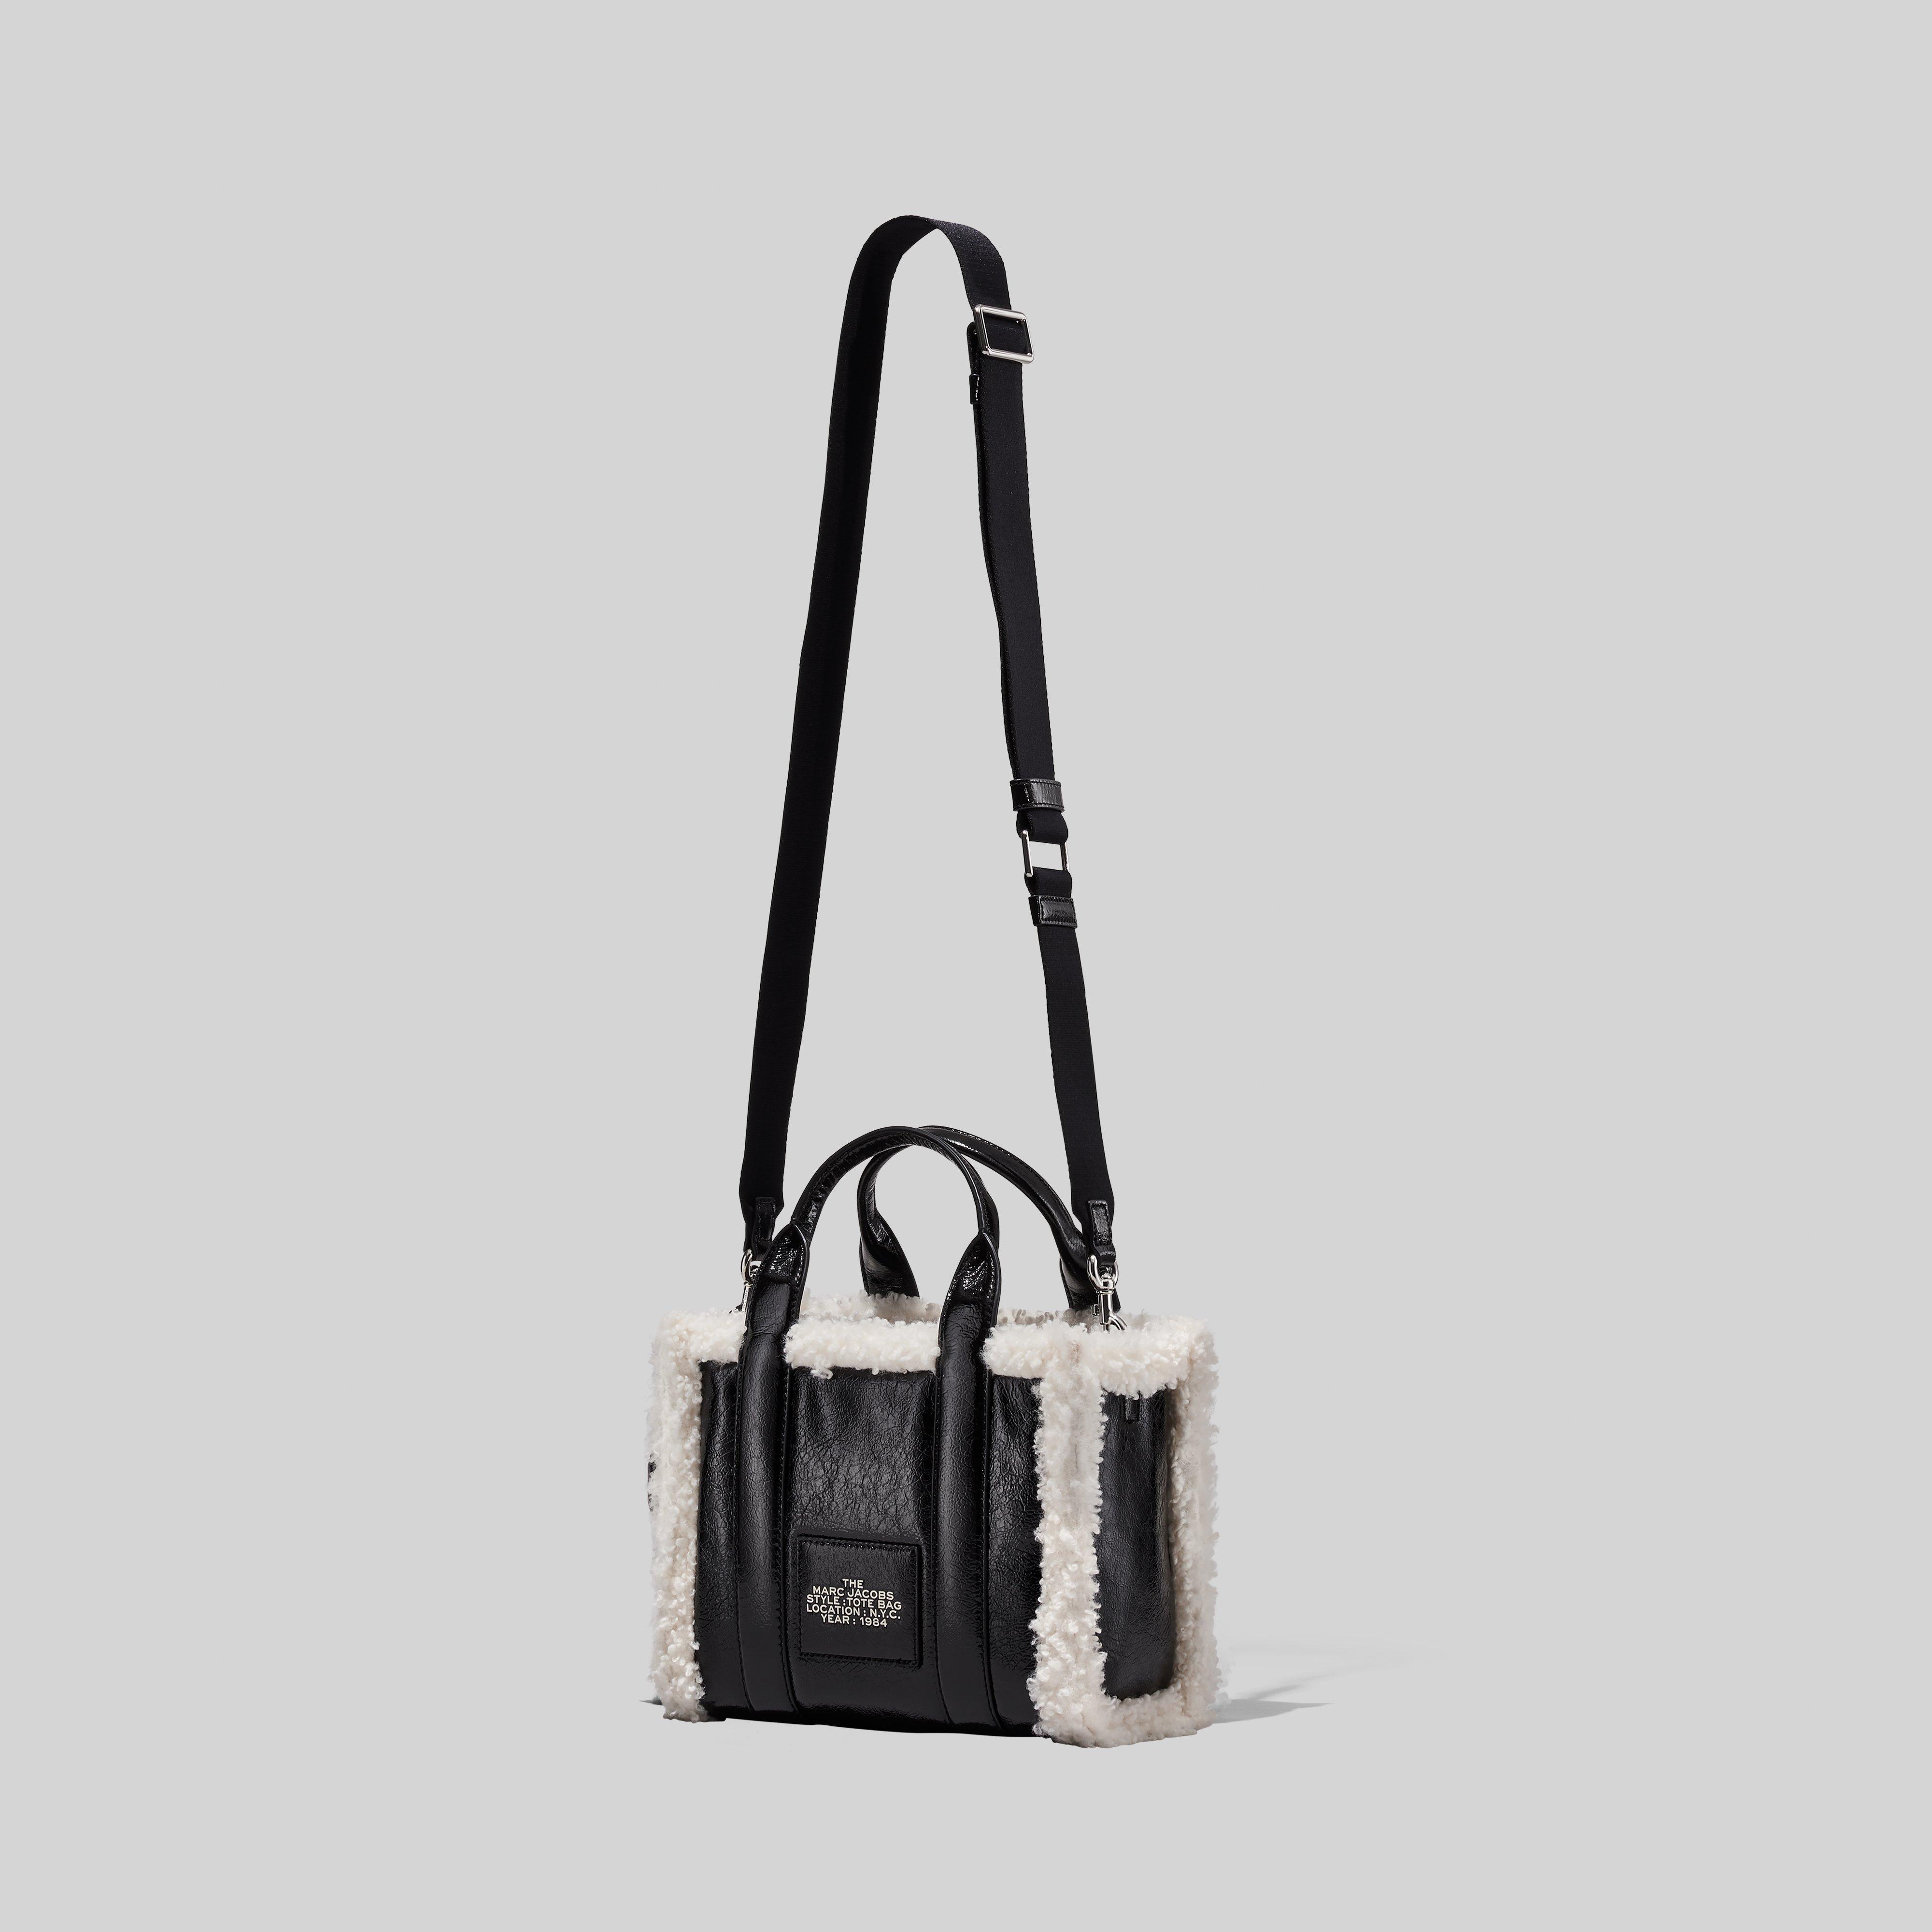 Marc Jacobs The Crinkle Tote Mini Leather Tote Bag in Black/White 